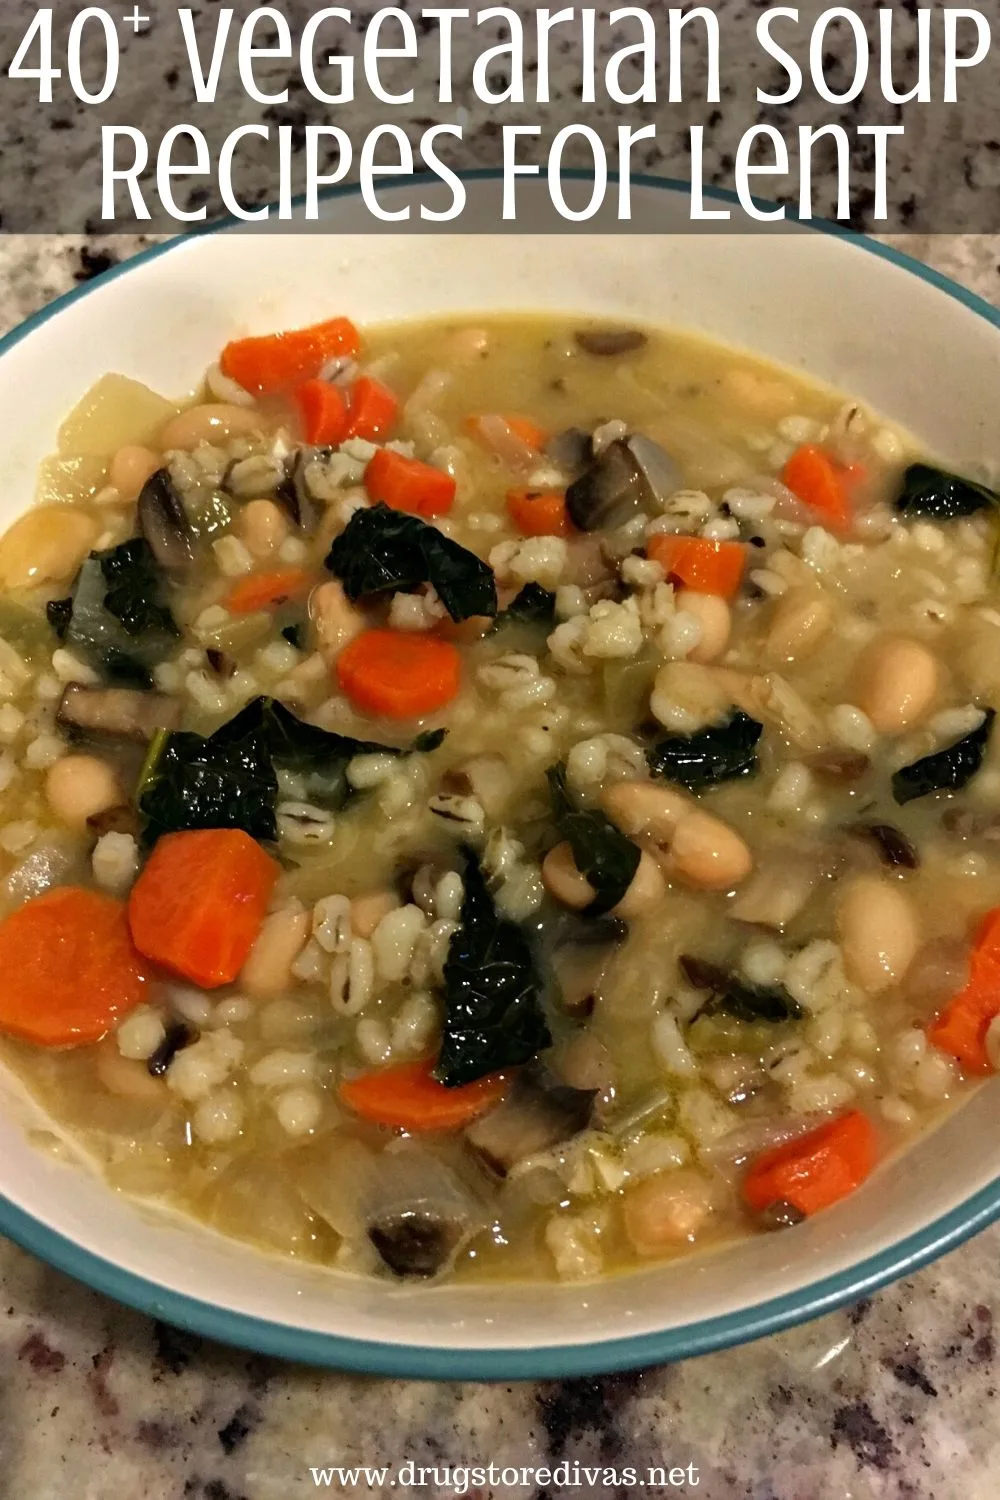 A bowl of soup with beans and carrots and the words "40+ Vegetarian Soup Recipes For Lent" digitally written above it.